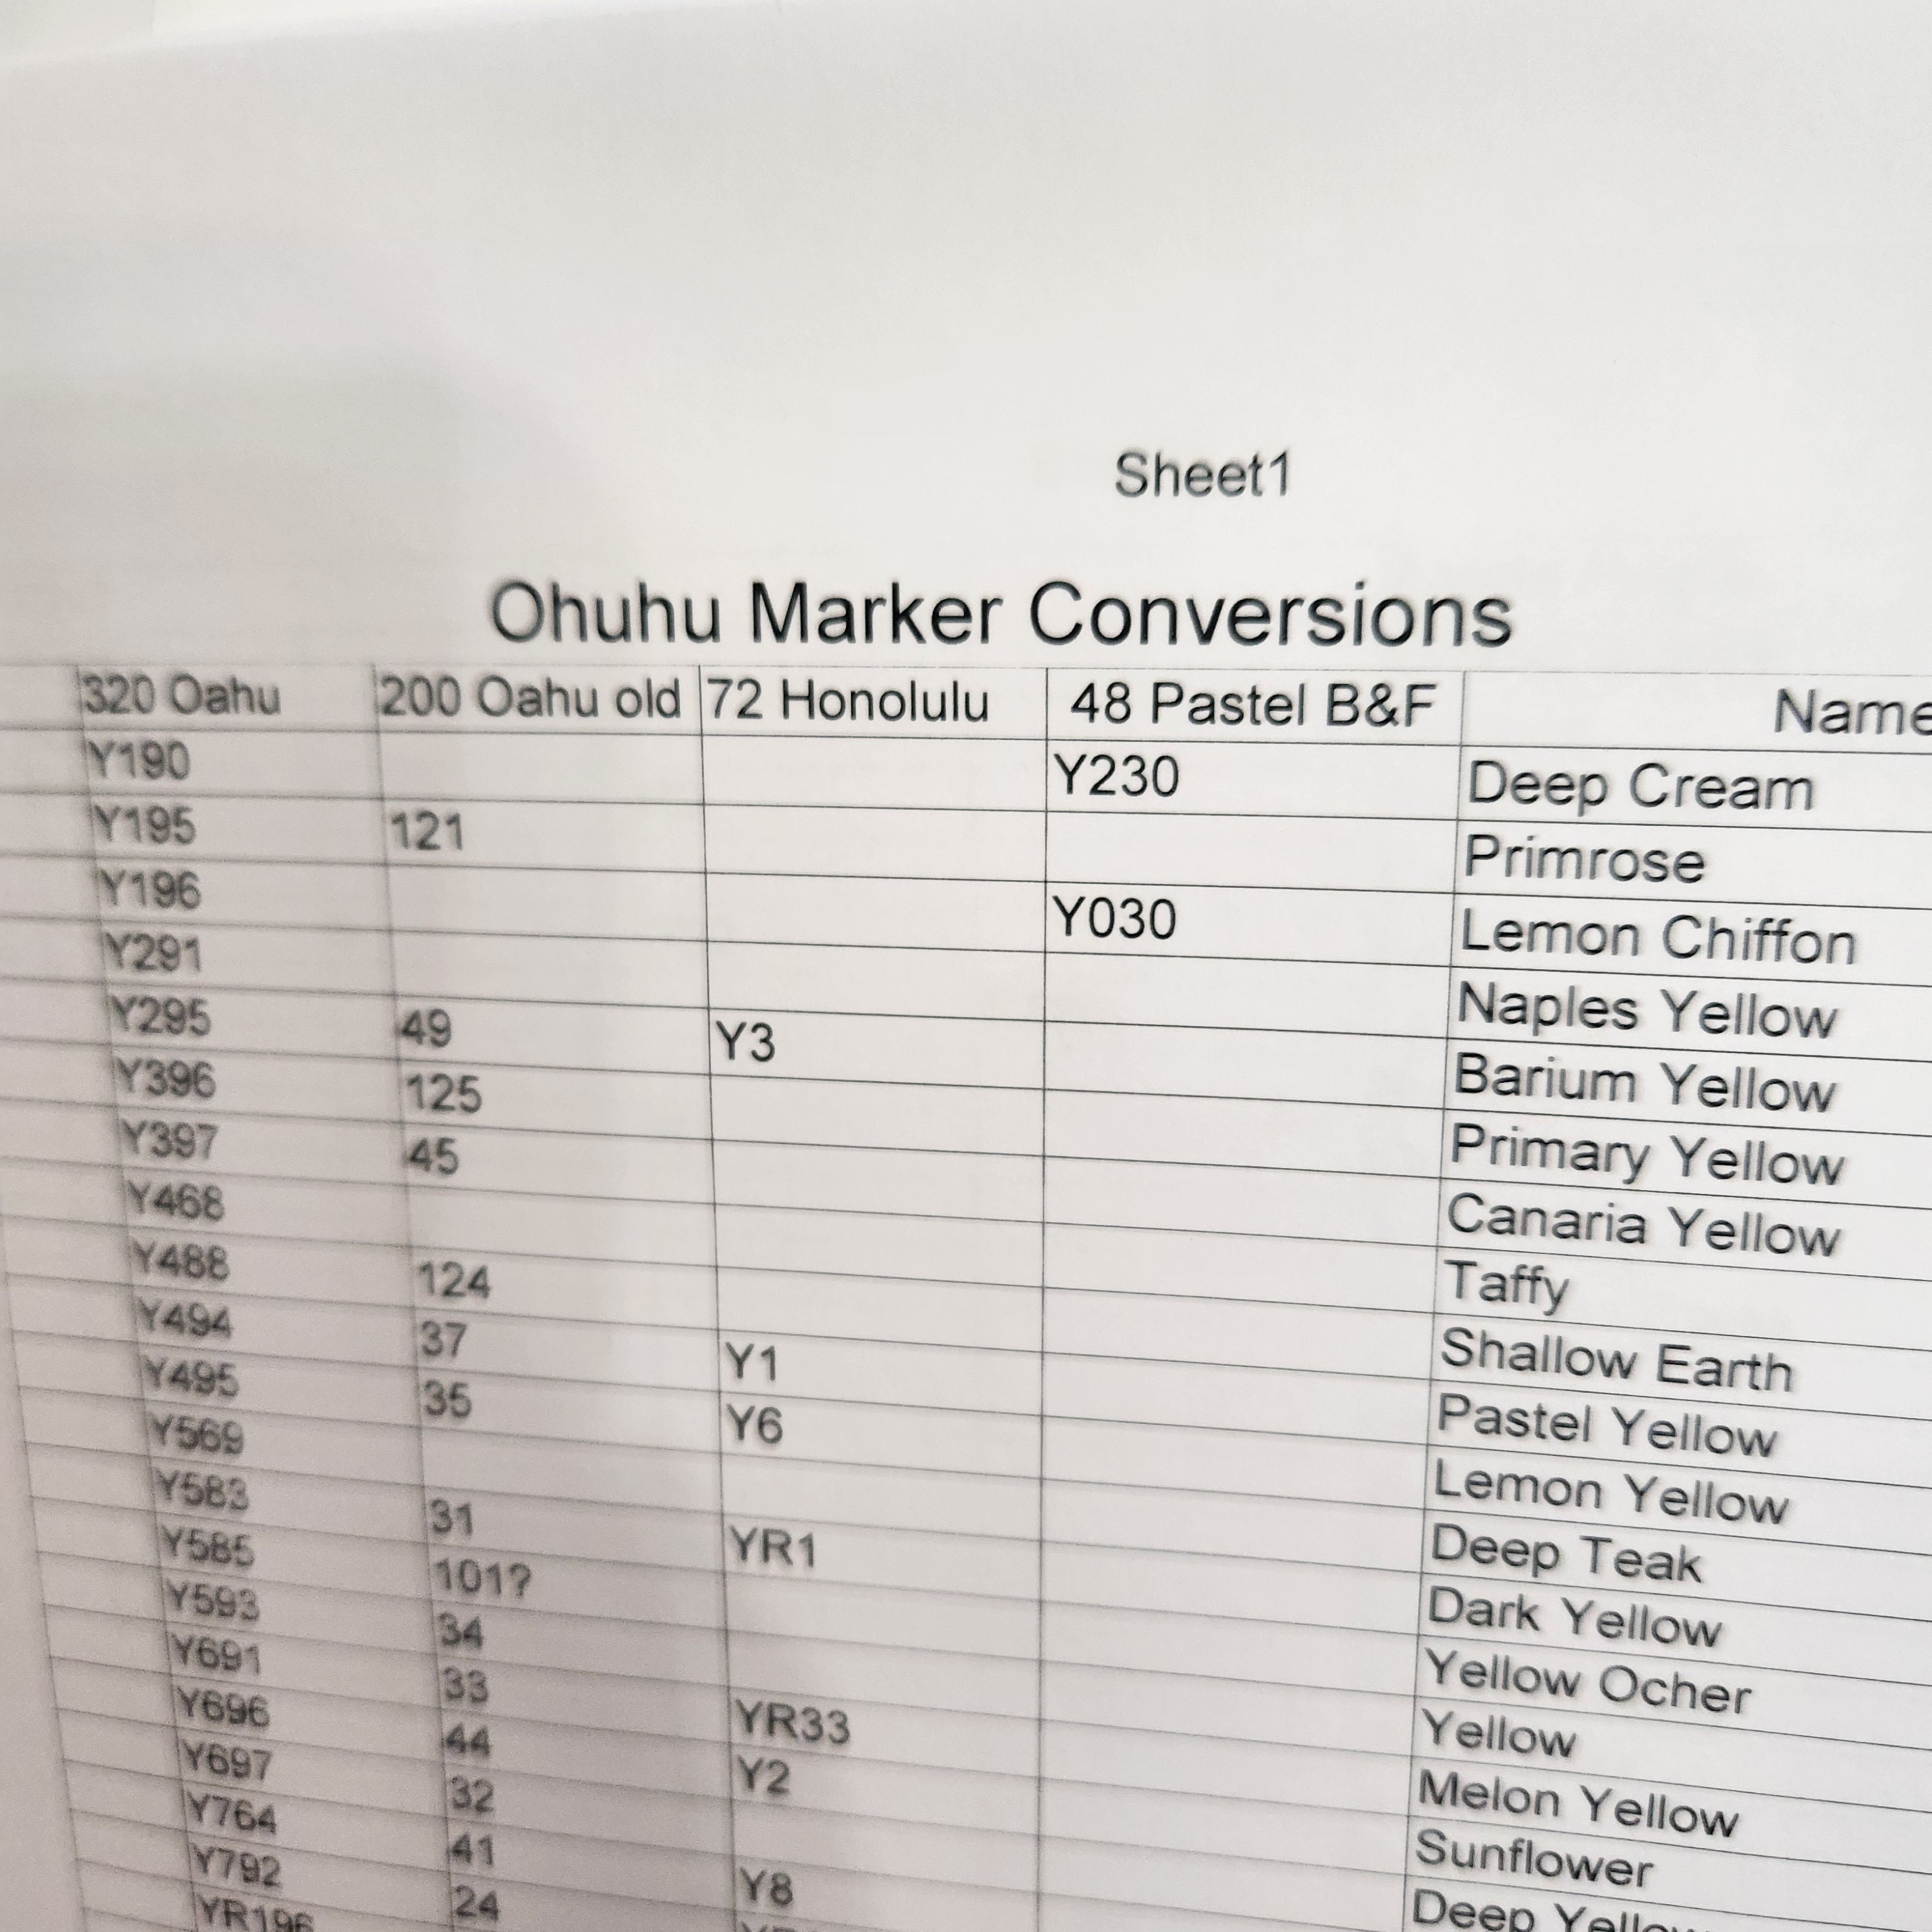 Ohuhu Marker Conversions Old 200 Oahu to New 320 Oahu Numbers 